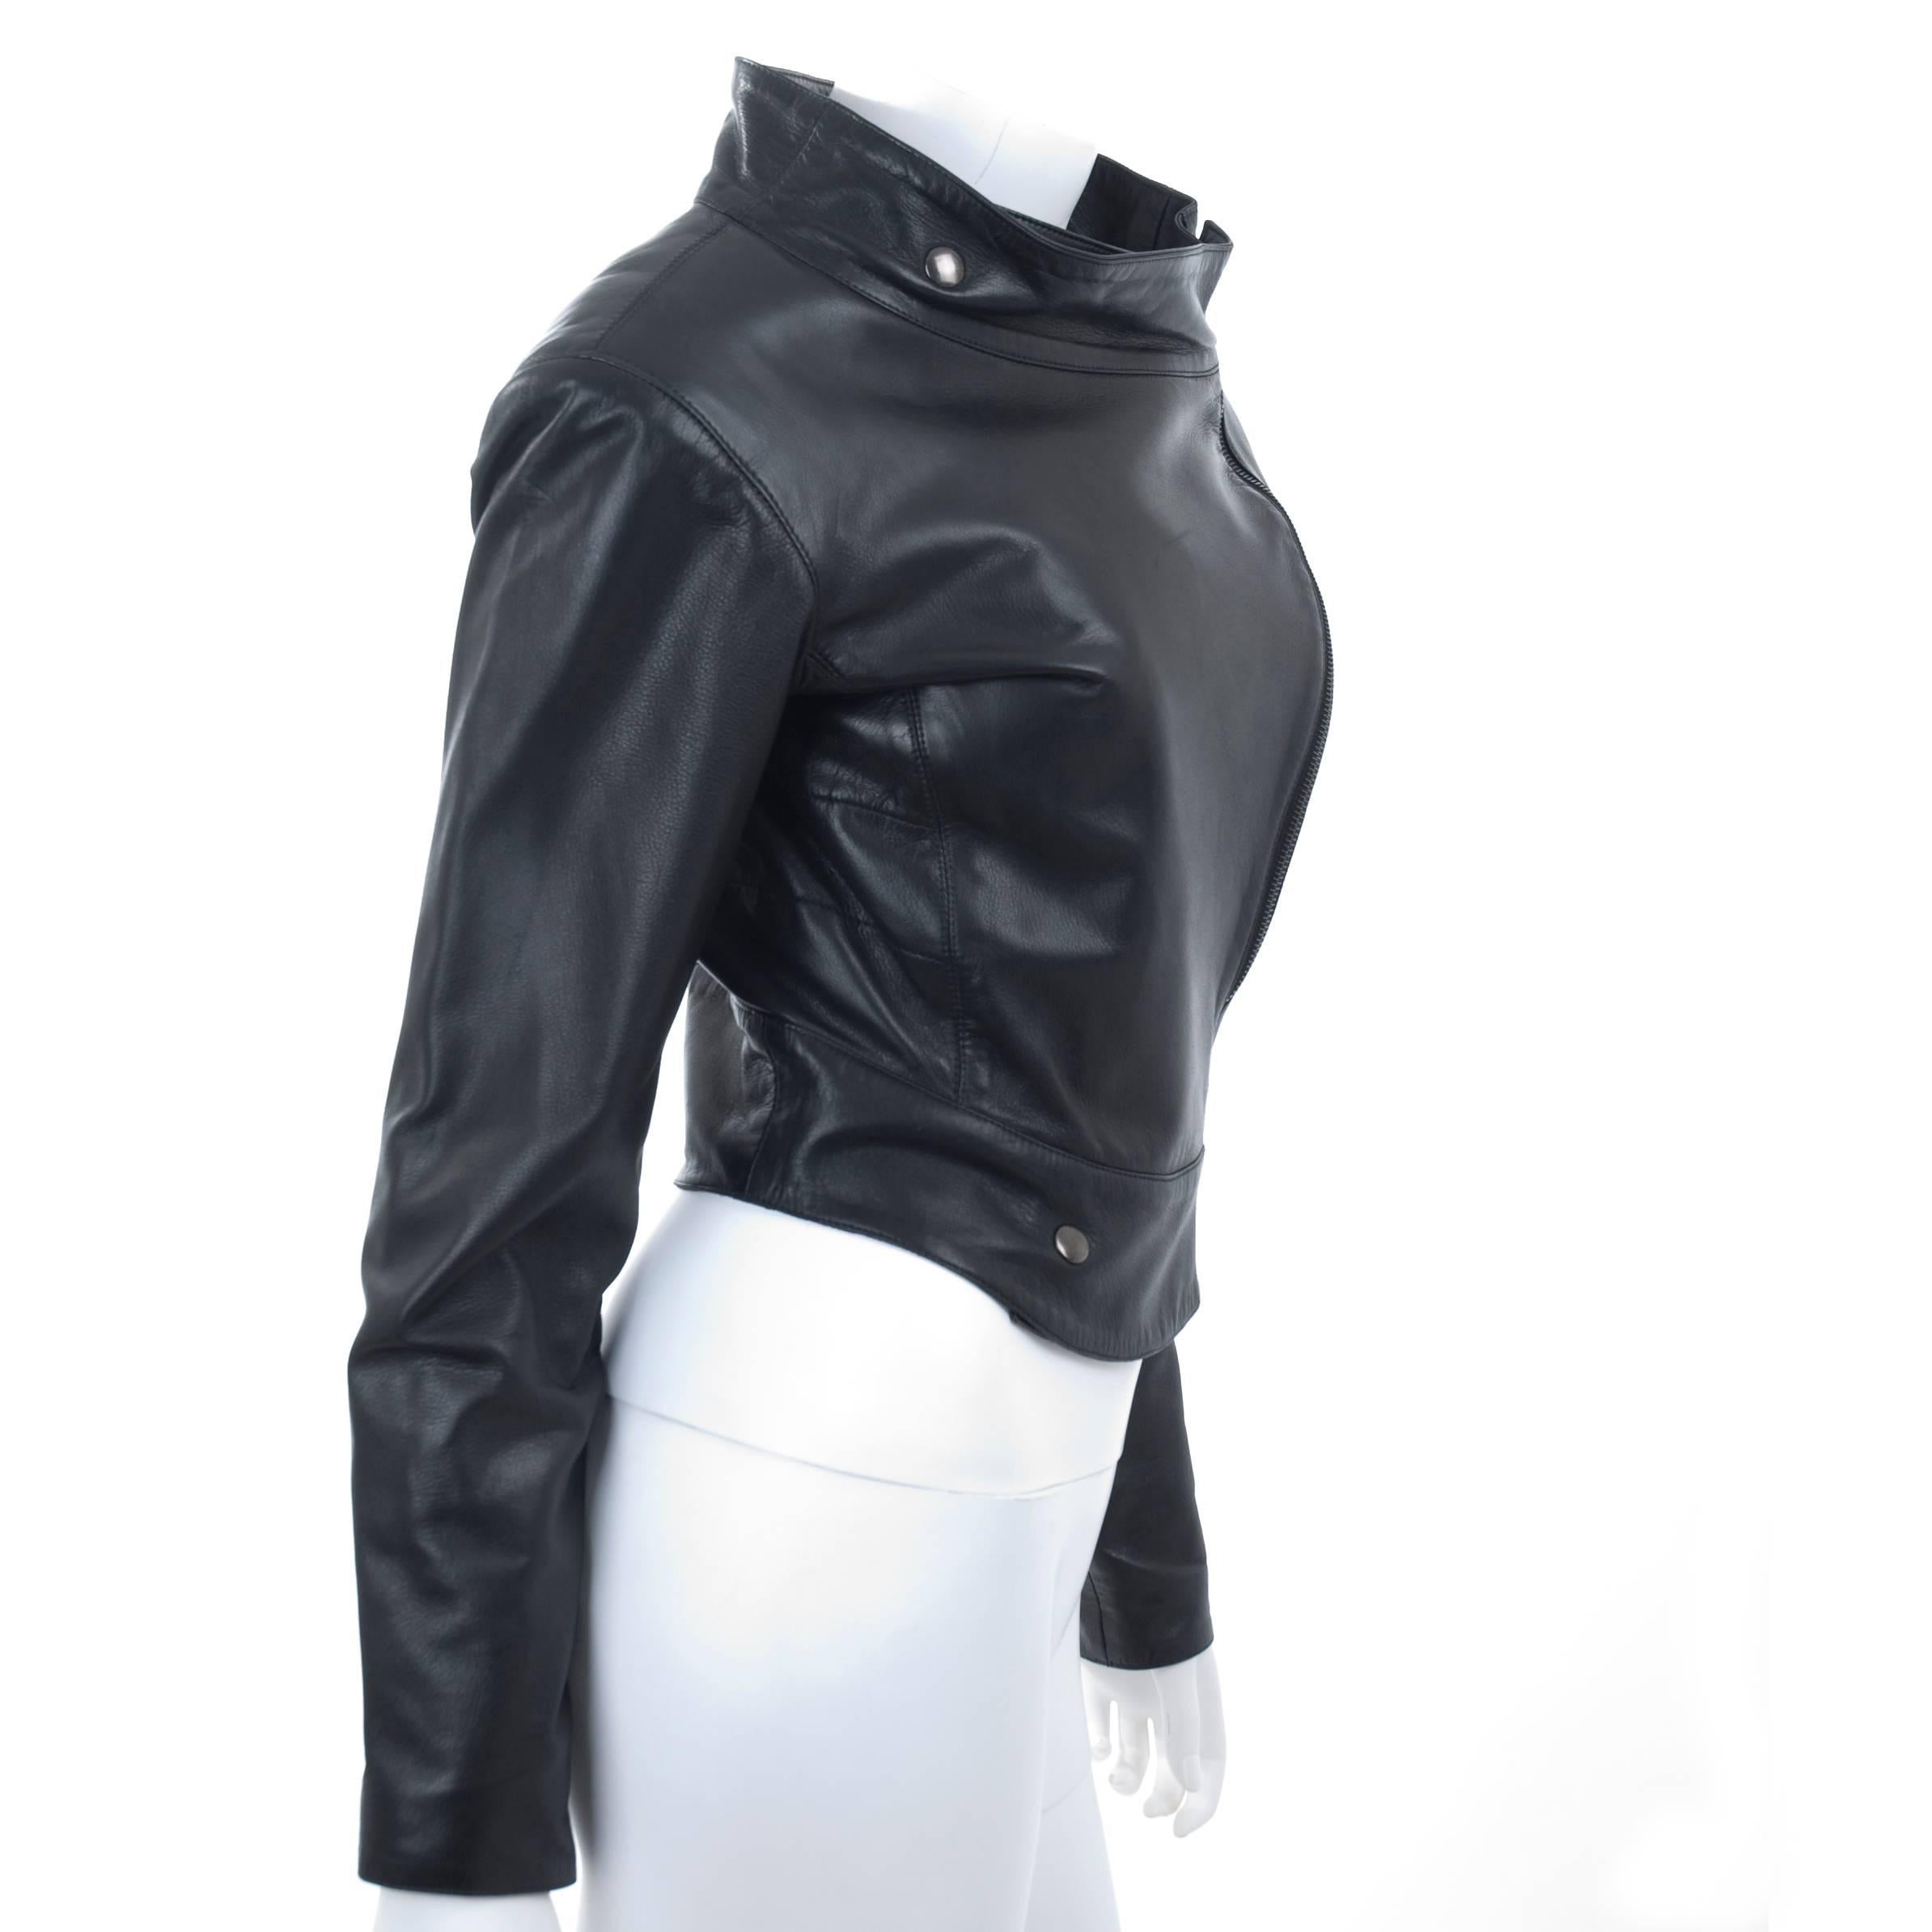 90's CLAUDE MONTANA beautiful short soft black leather jacket.
Excellent condition, zipper and snap closure.
No size label. The jacket fits the mannequin perfect.
Here the measurements from the mannequin.
Bust 32 waist 25 inches.